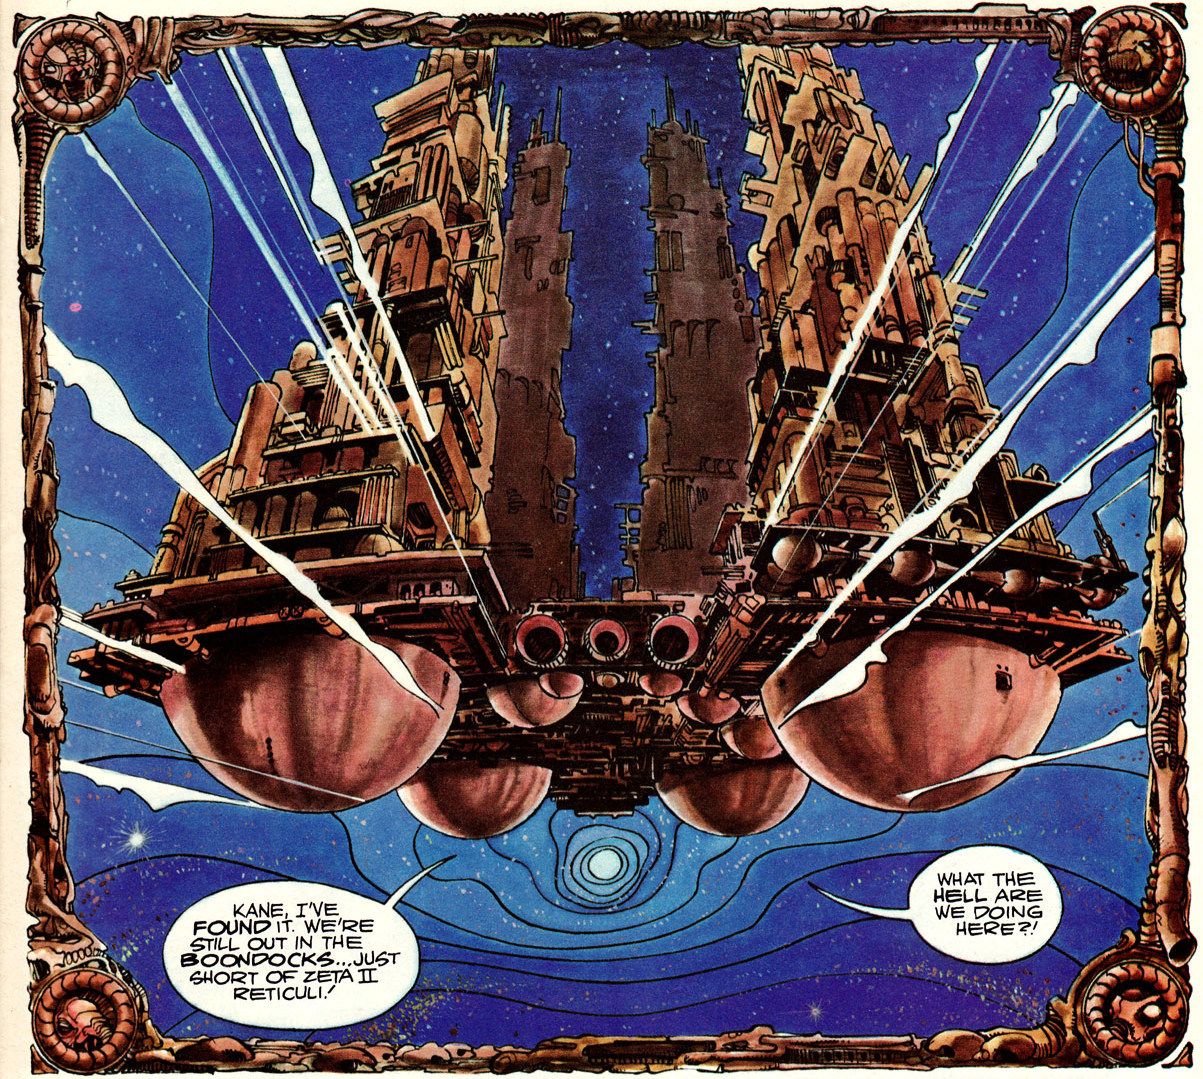 Heavy Metal. 1979. May. Alien: The Illustrated Story – Walter Simonson and Archie Goodwin